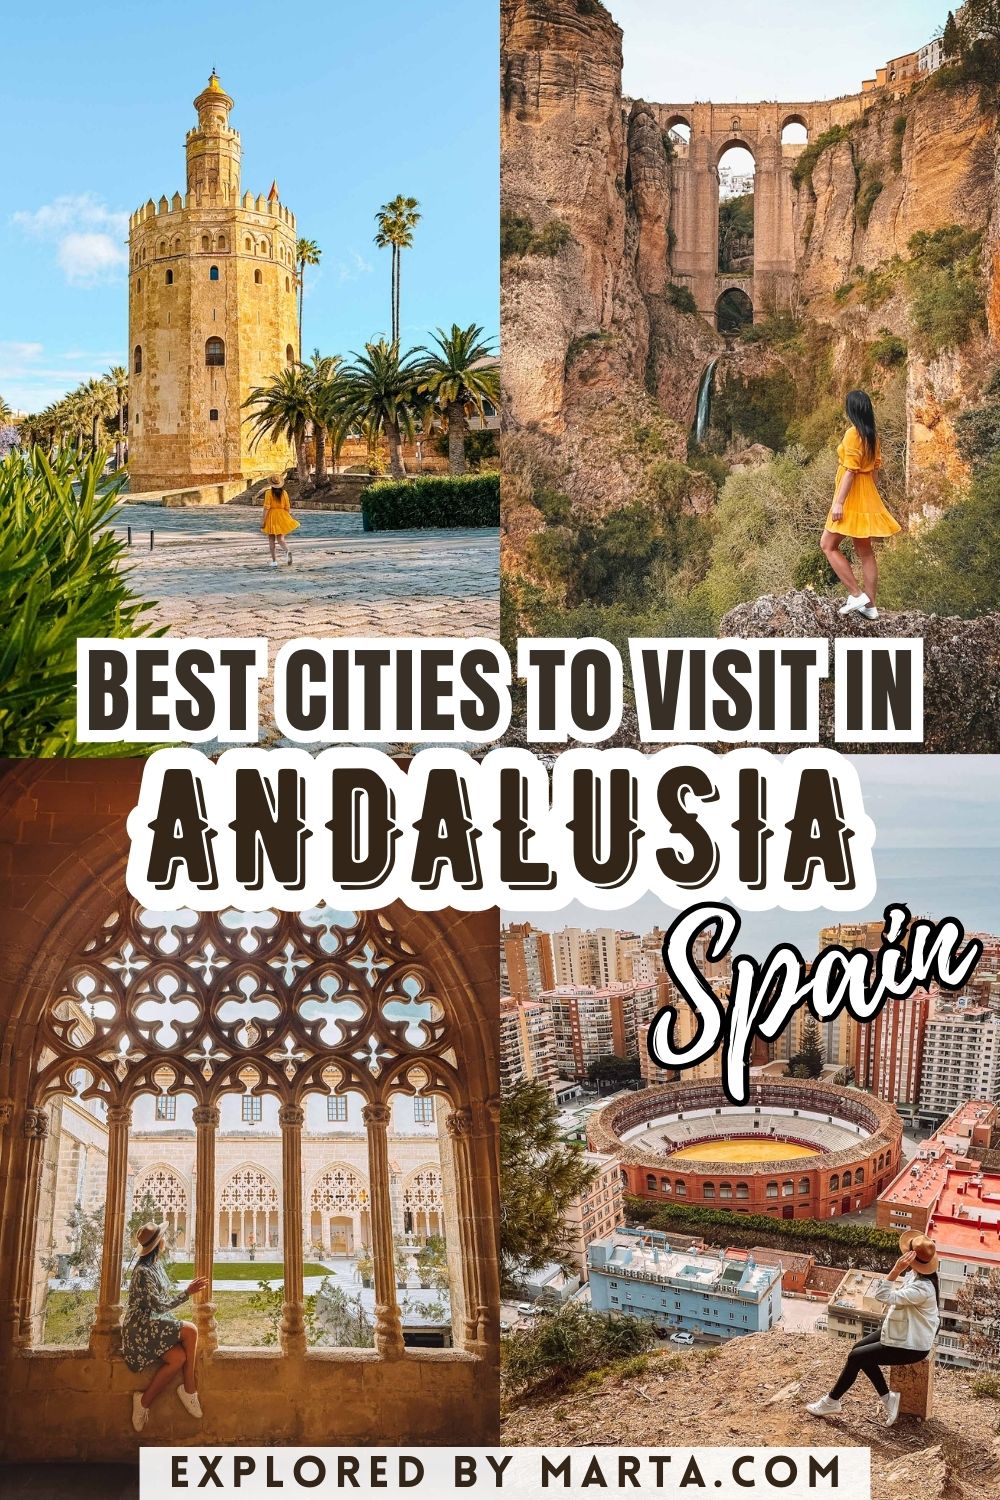 Best cities you should visit in Andalusia, Spain